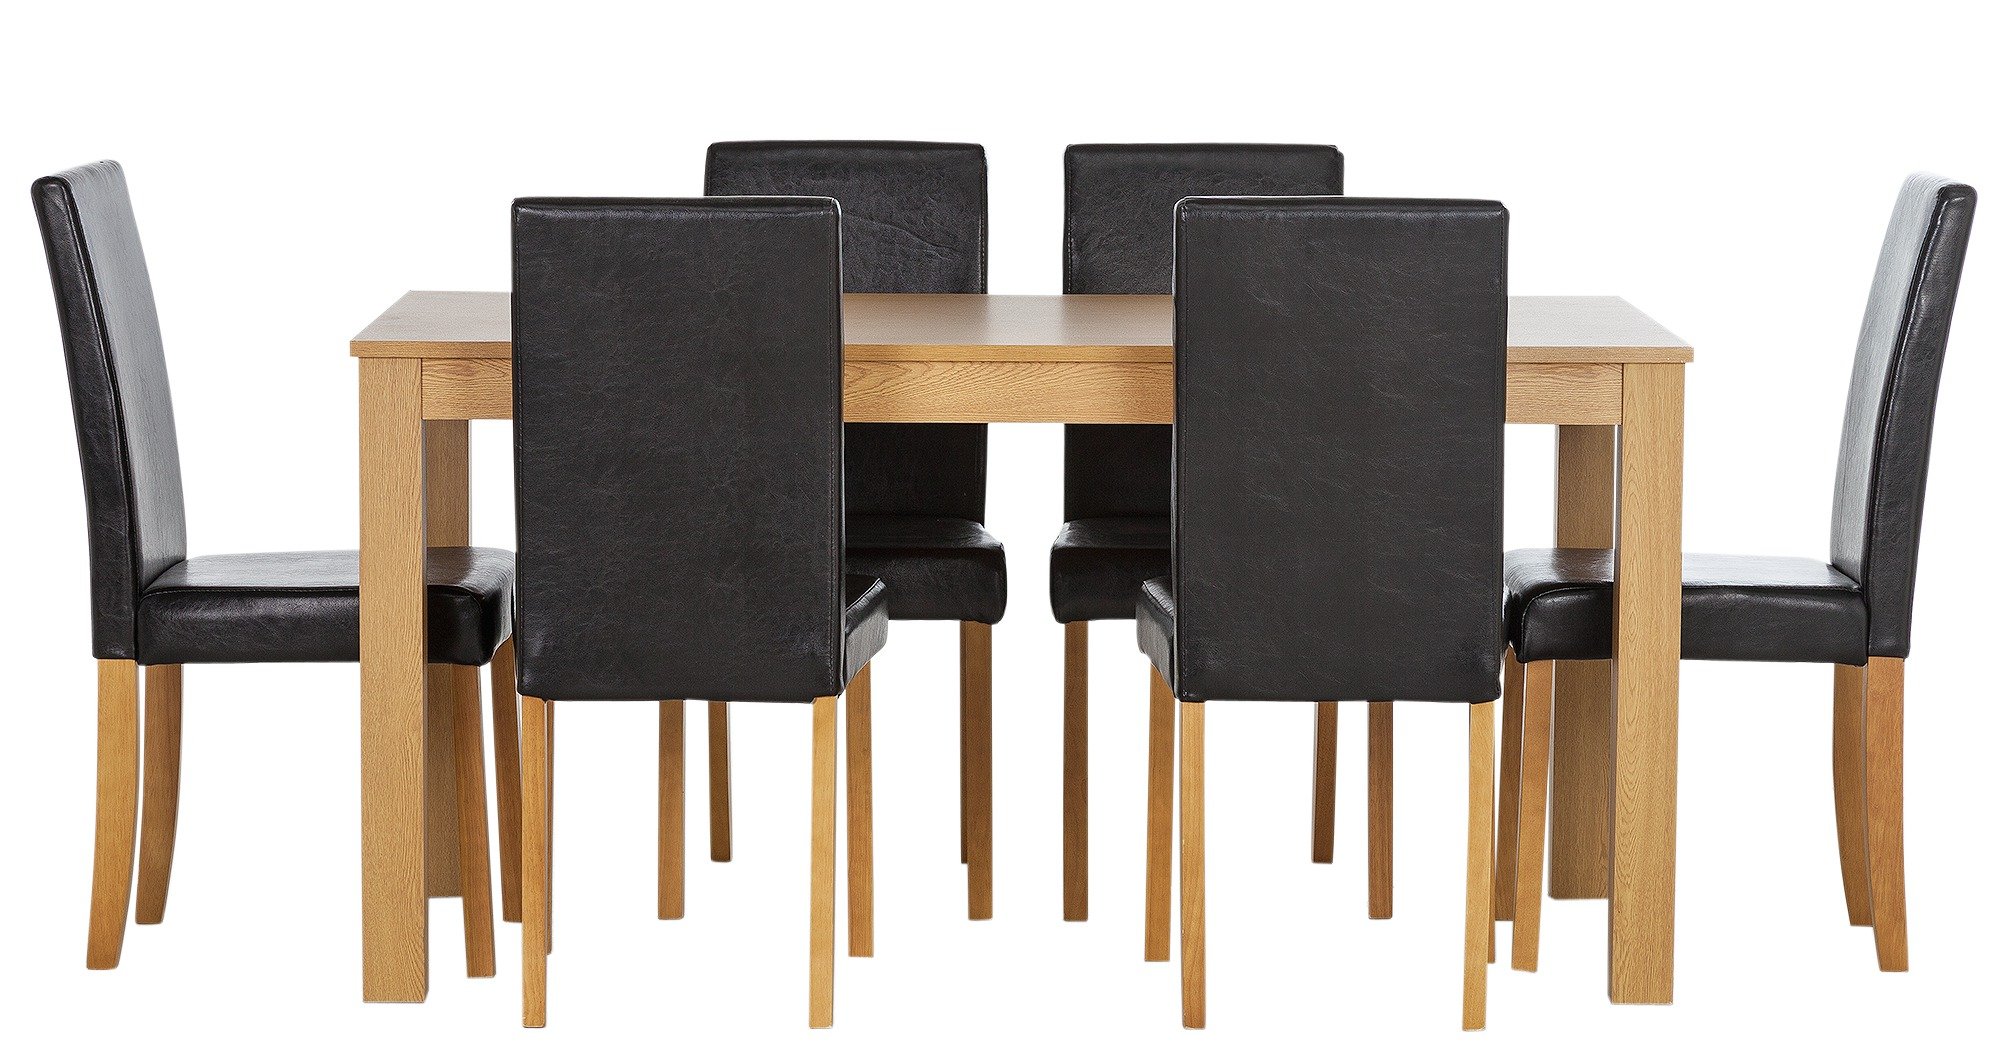 Argos Home Elmdon Oak Effect Dining Table & 6 Chairs Reviews